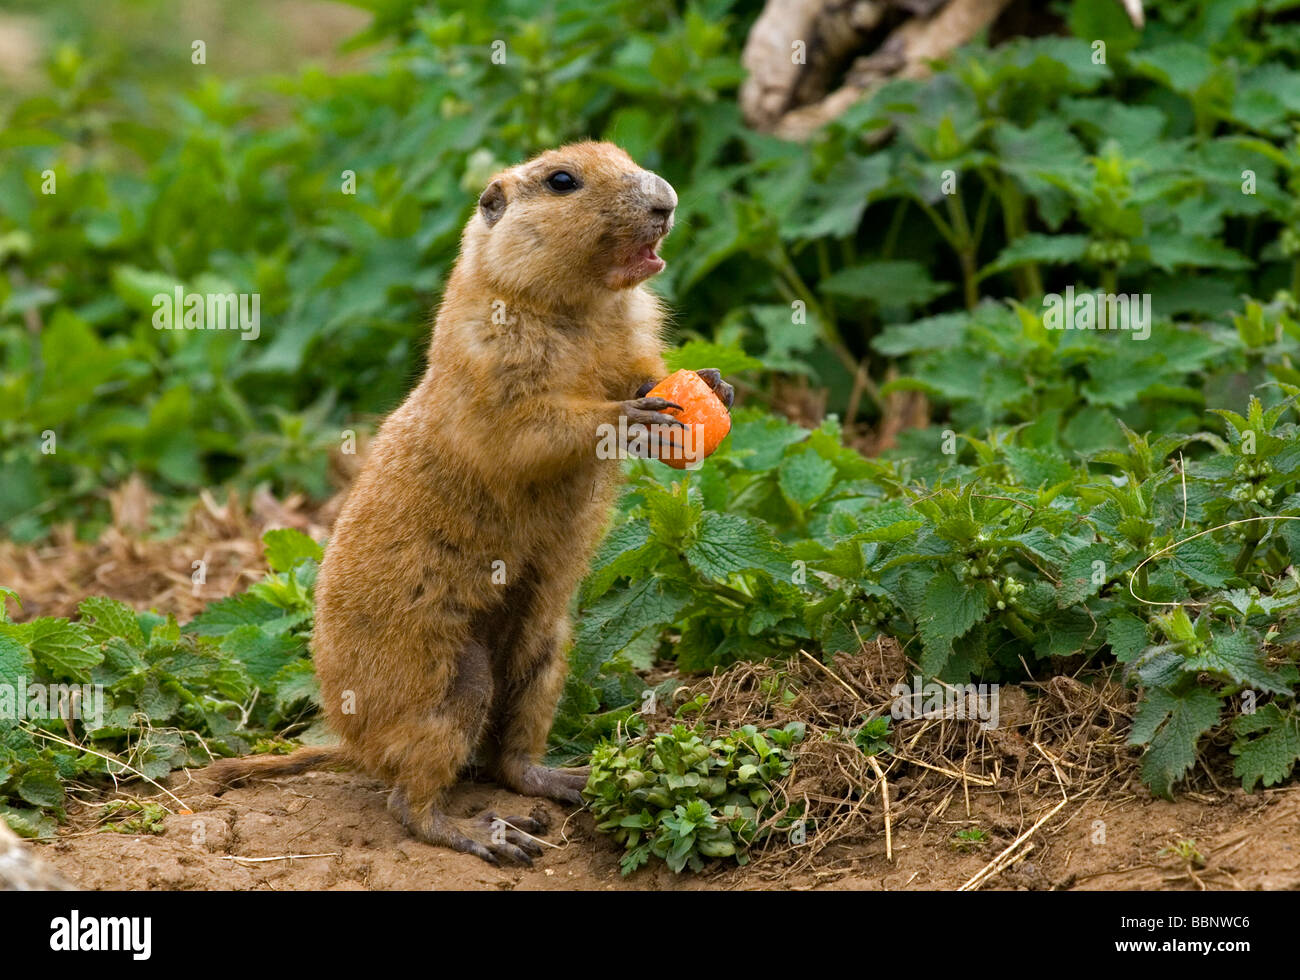 Black Tailed Prairie Dog Cynomys ludovicianus a rodent of the family sciuridae found in the Great Plains of North America Stock Photo